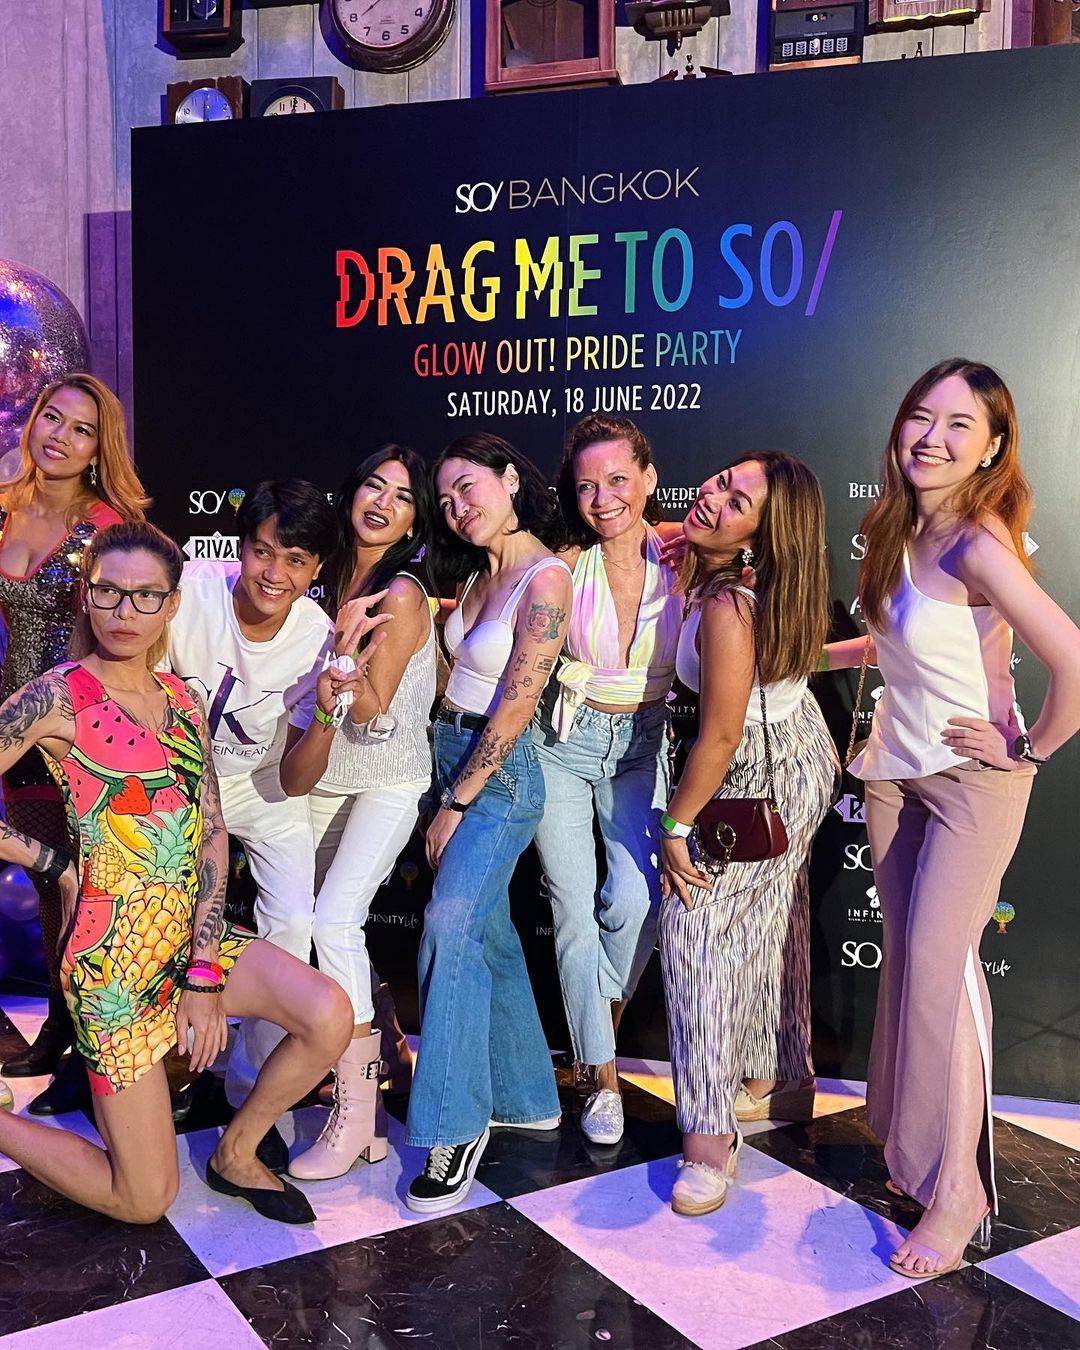 A group of women posing together at the Drag Me To SO/ party. 